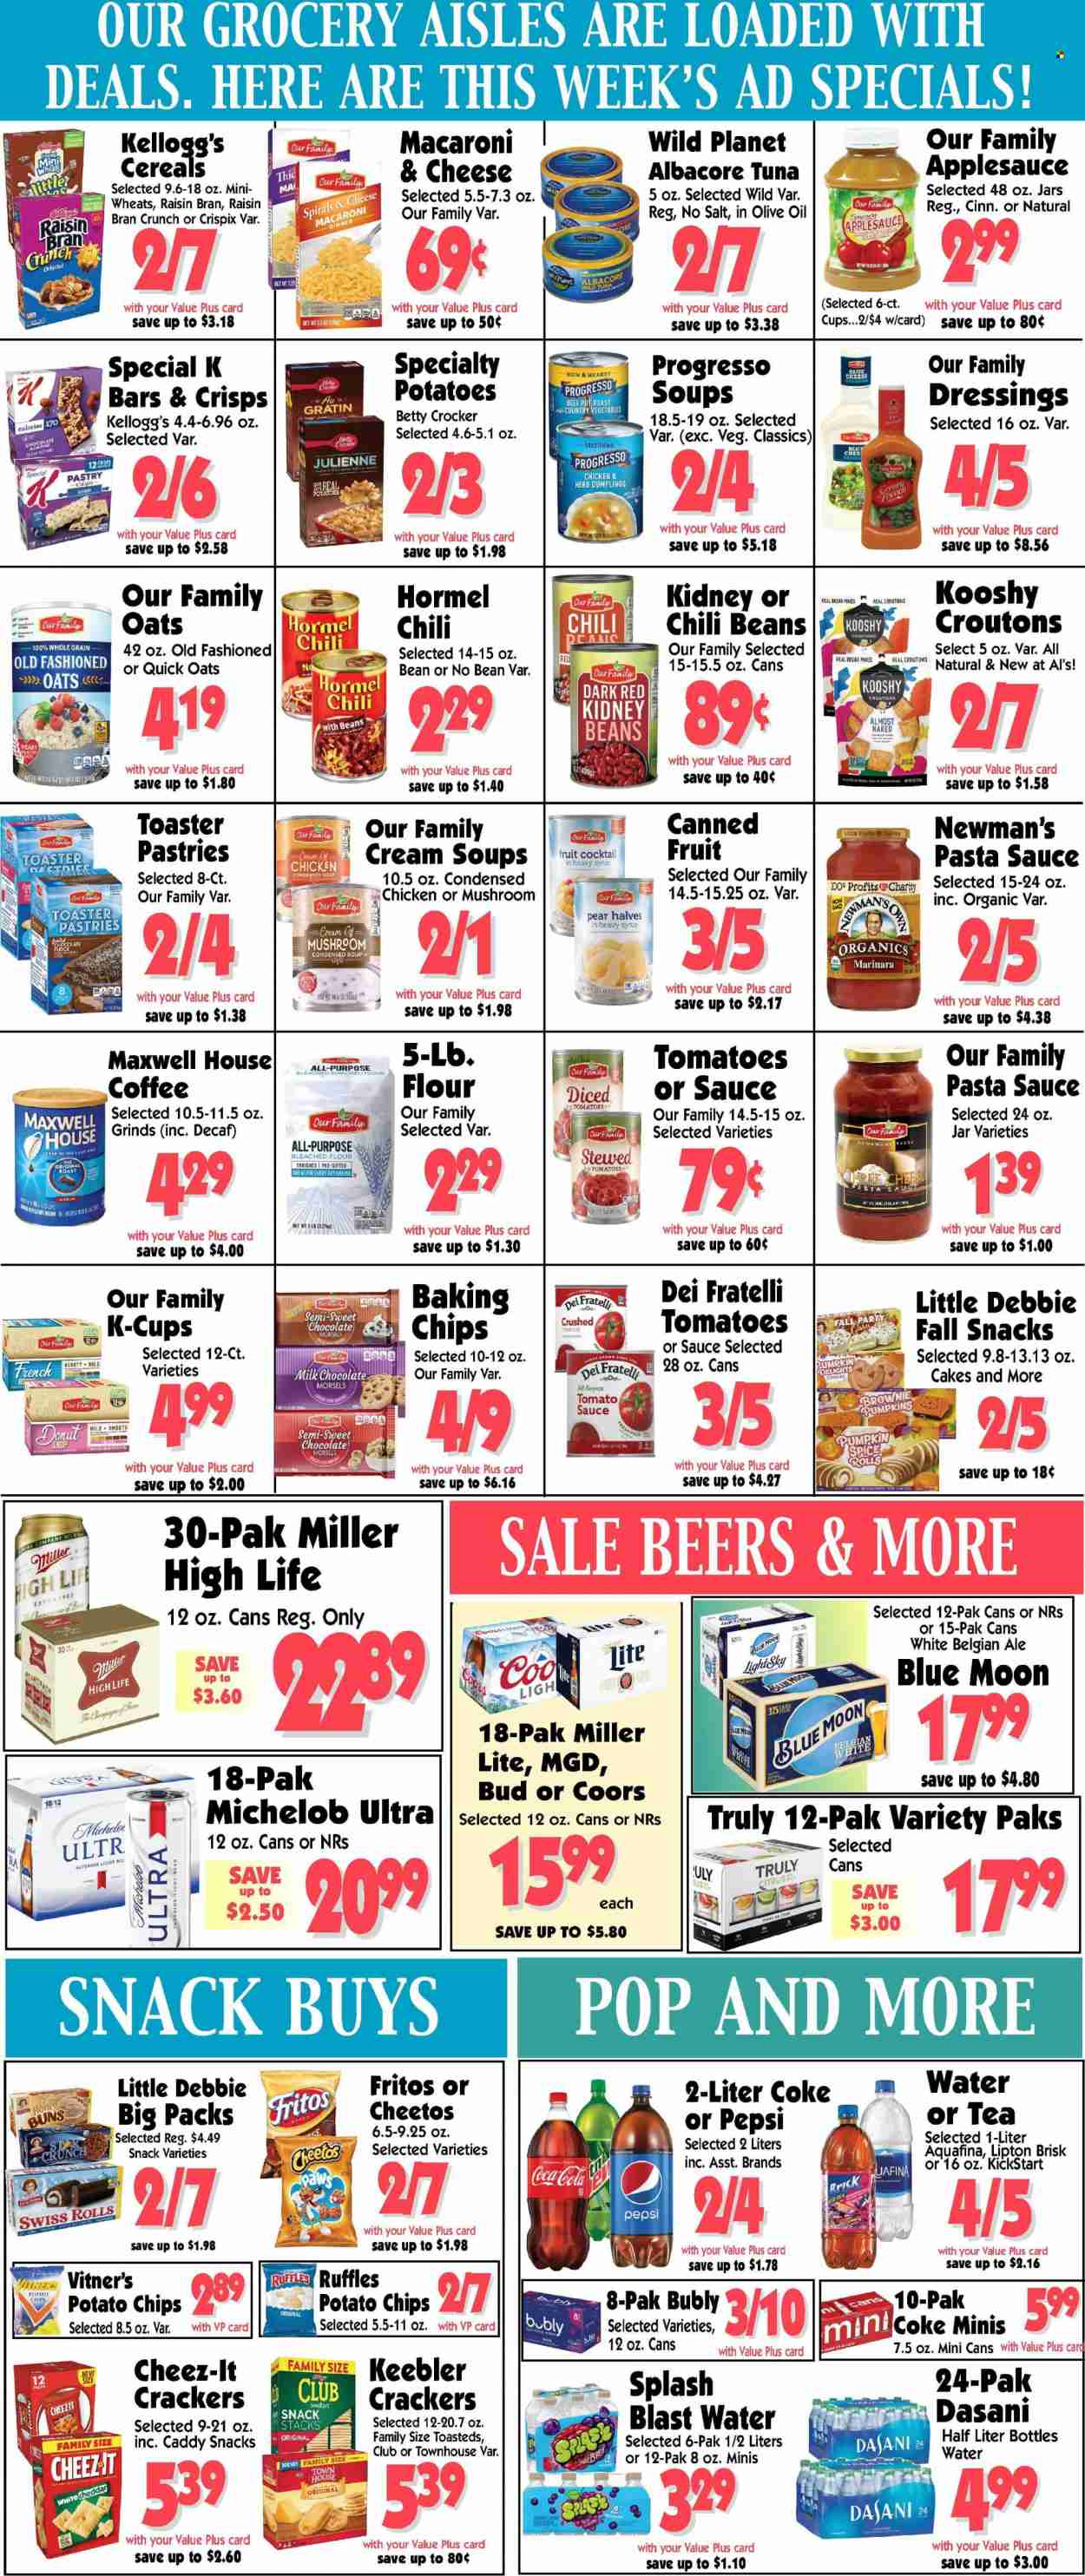 thumbnail - Al's Supermarket Flyer - 10/05/2022 - 10/11/2022 - Sales products - bread, cake, buns, brownies, pears, tuna, macaroni & cheese, pasta sauce, condensed soup, soup, dumplings, instant soup, Progresso, Hormel, milk chocolate, snack, crackers, Kellogg's, Keebler, Fritos, potato chips, Cheetos, Cheez-It, Ruffles, croutons, flour, oats, crushed tomatoes, tomato sauce, kidney beans, chili beans, canned fruit, cereals, nut bar, Quick Oats, Raisin Bran, spice, apple sauce, syrup, Coca-Cola, Pepsi, Lipton, Aquafina, Maxwell House, tea, coffee, coffee capsules, K-Cups, champagne, Hard Seltzer, TRULY, beer, pot, Miller Lite, Coors, Blue Moon, Michelob. Page 4.